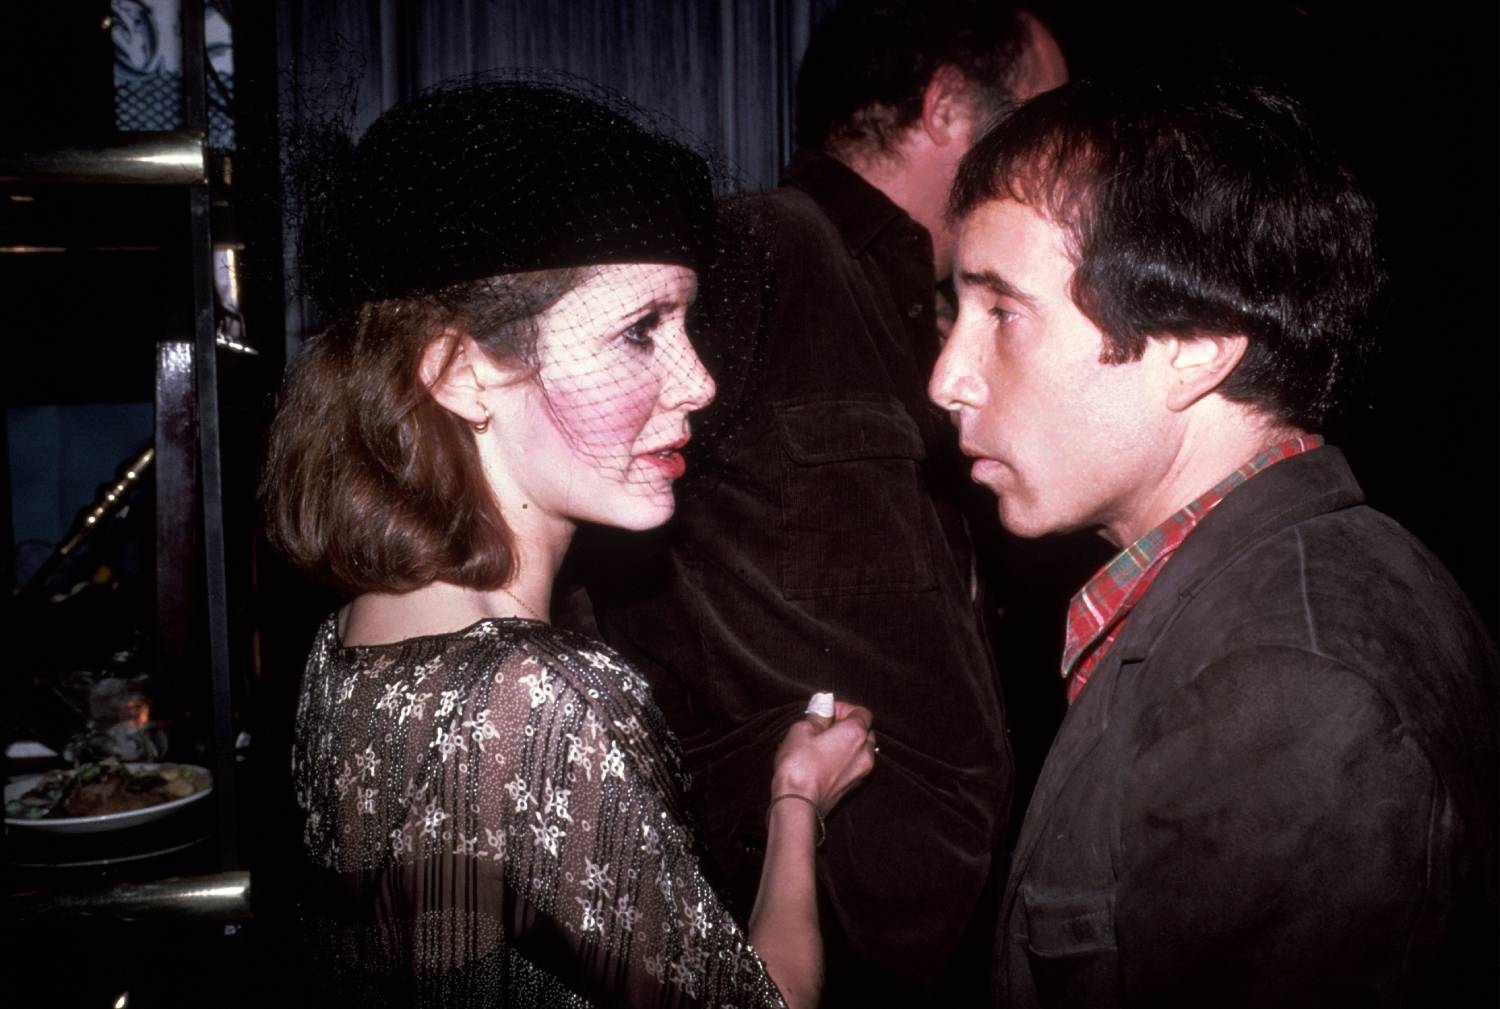 NEW YORK - CIRCA 1980: Carrie Fisher and Paul Simon circa 1980 in New York City.